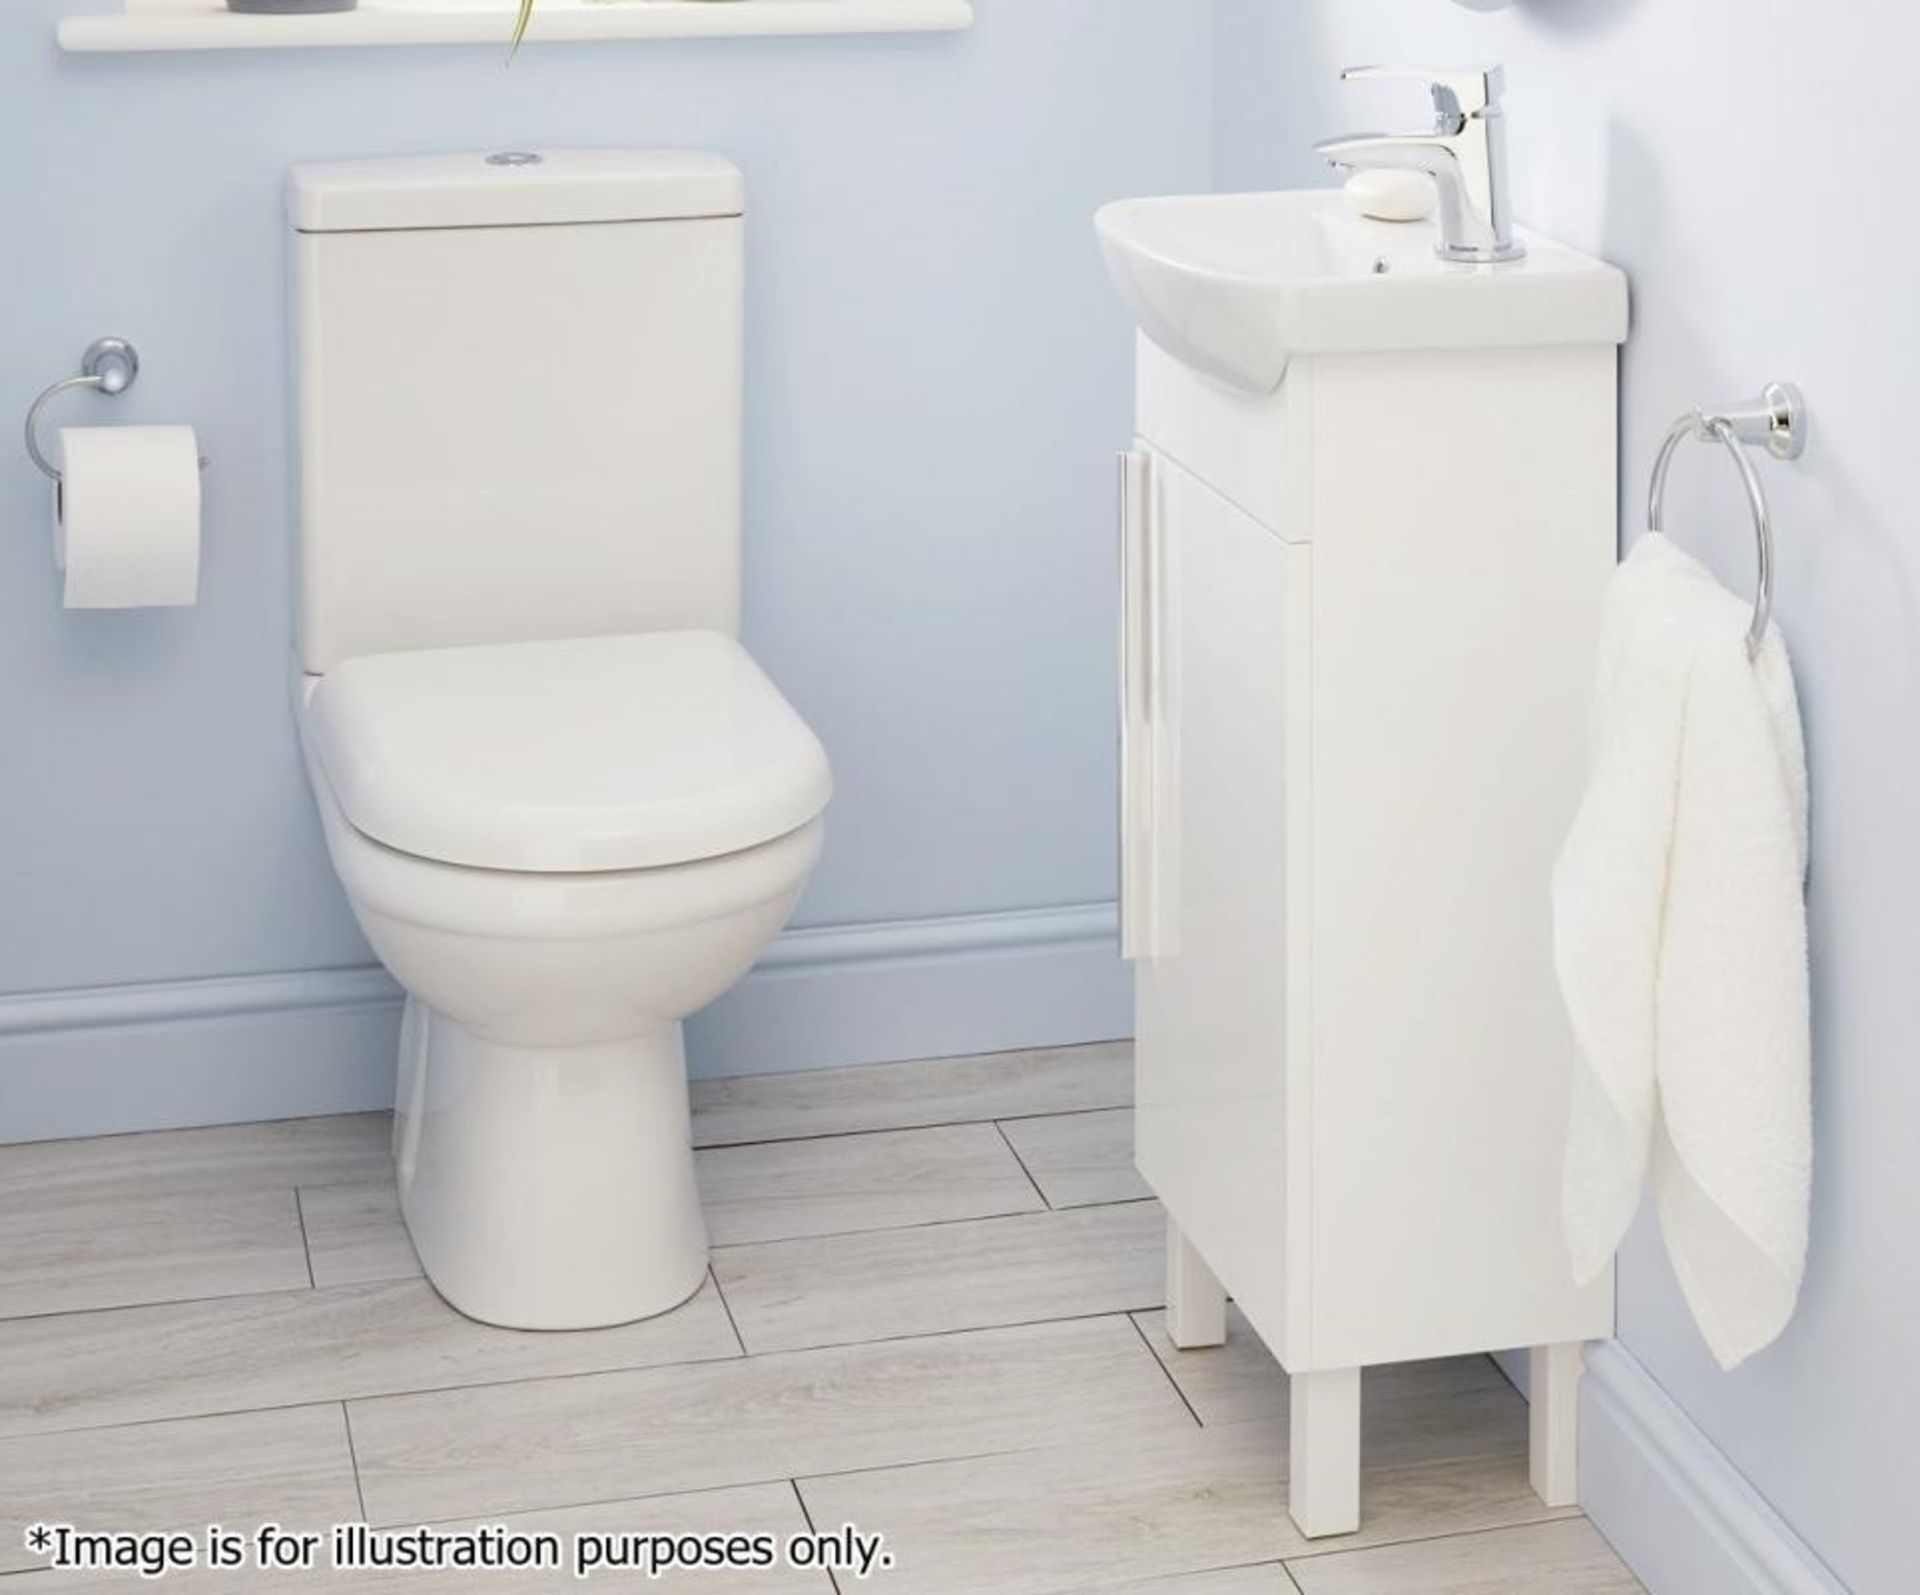 1 x Estilo Louis 40 Vanity Unit & Basin In White - Includes Twyfords Top Action Lever Mono Tap - All - Image 6 of 8